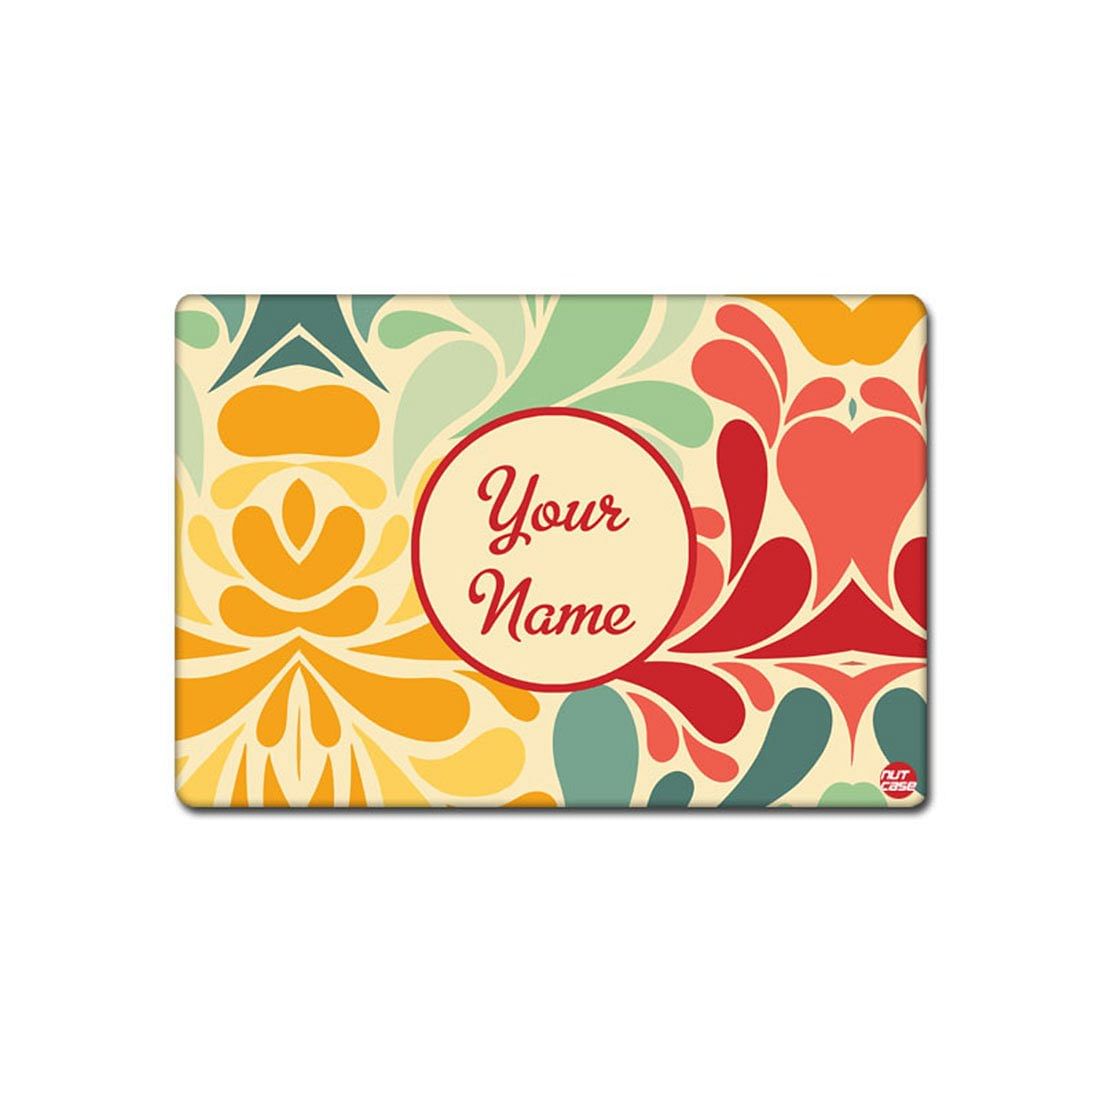 Personalized Placemats for Dining Table Add Your Name - Retro Flower Nutcase